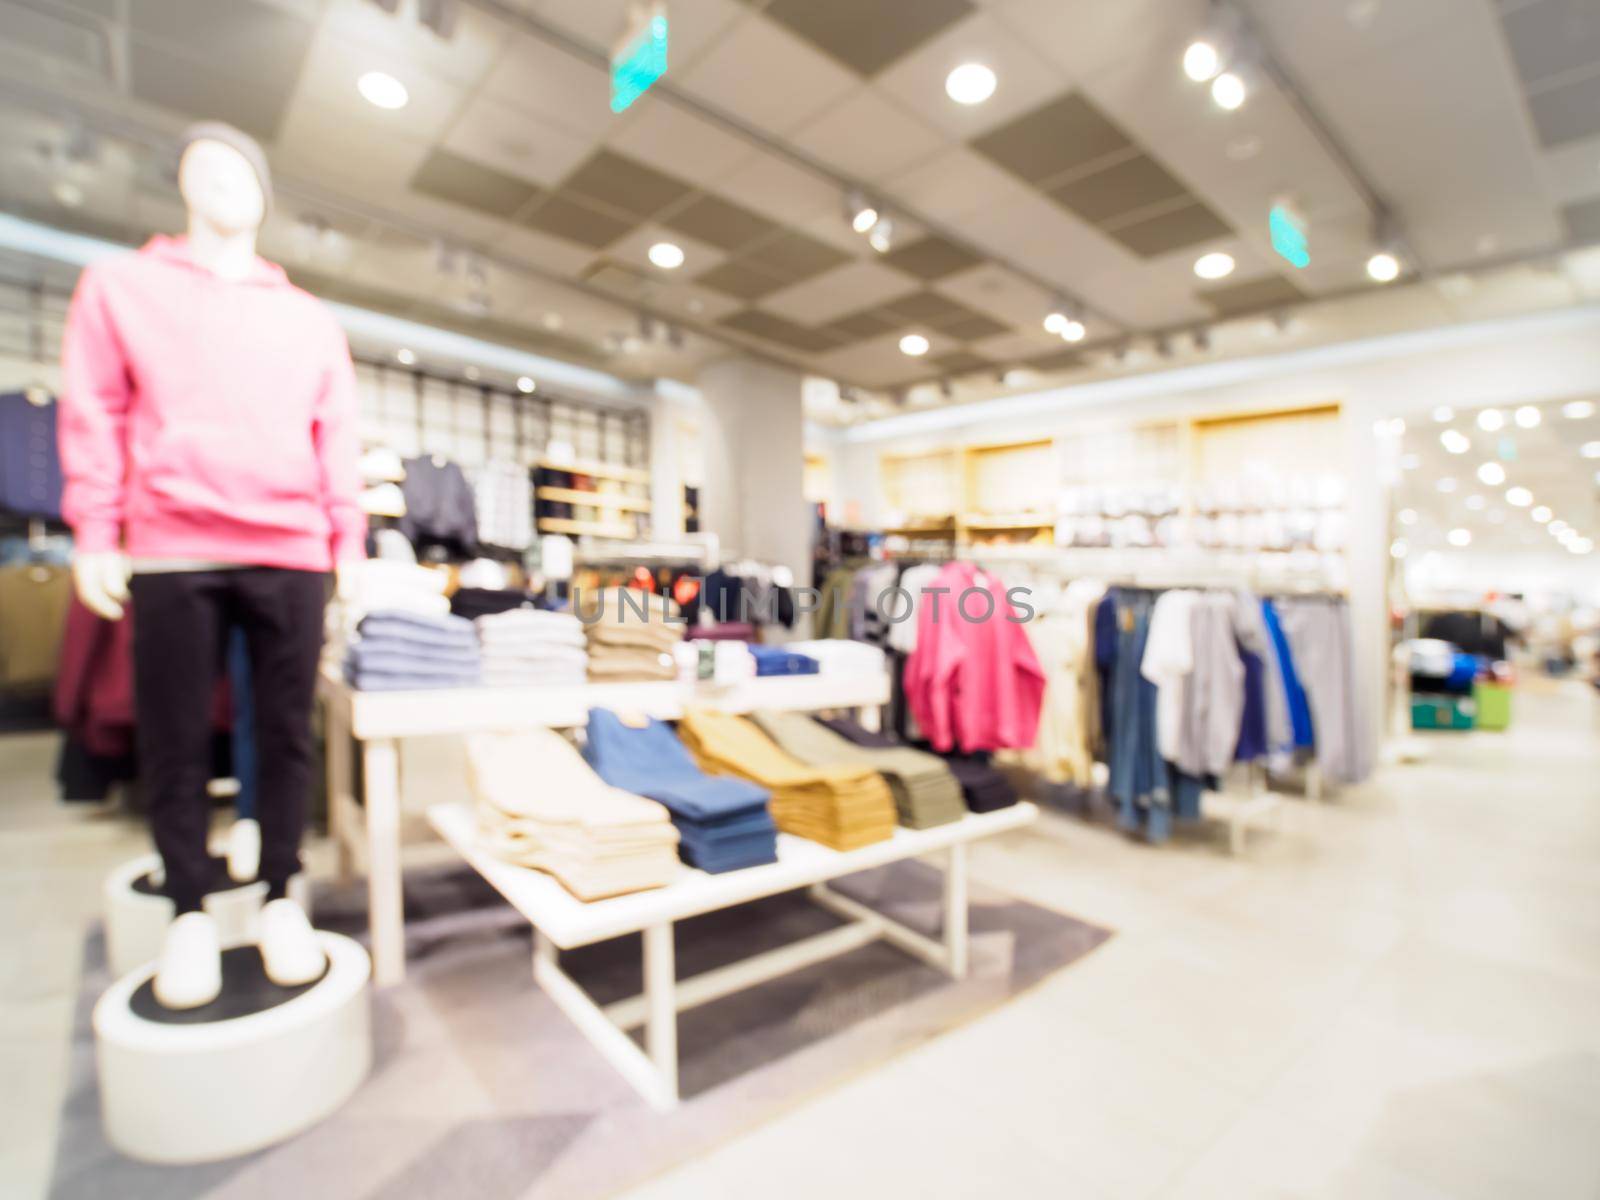 Blur image of clothes and mannequins in clothing store as background